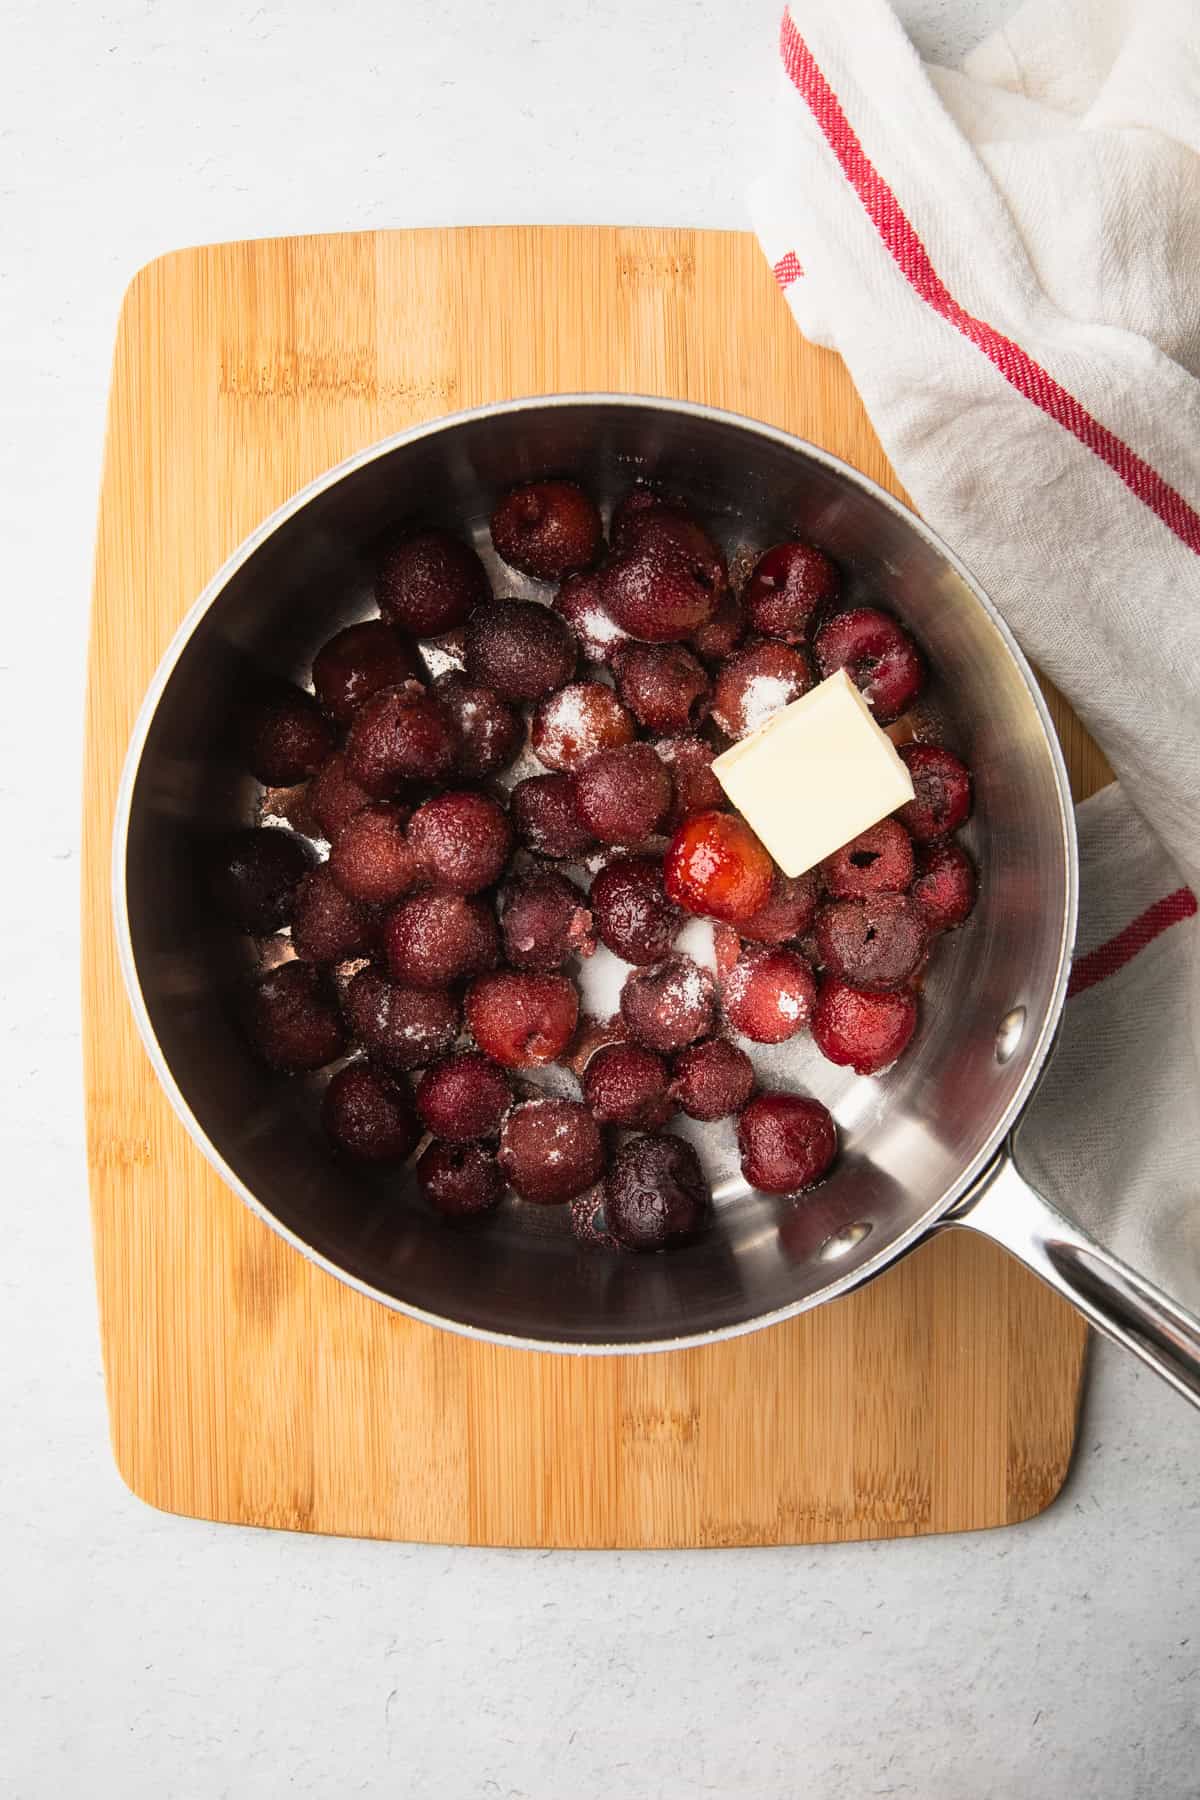 Cooking the cherries to make the cake.